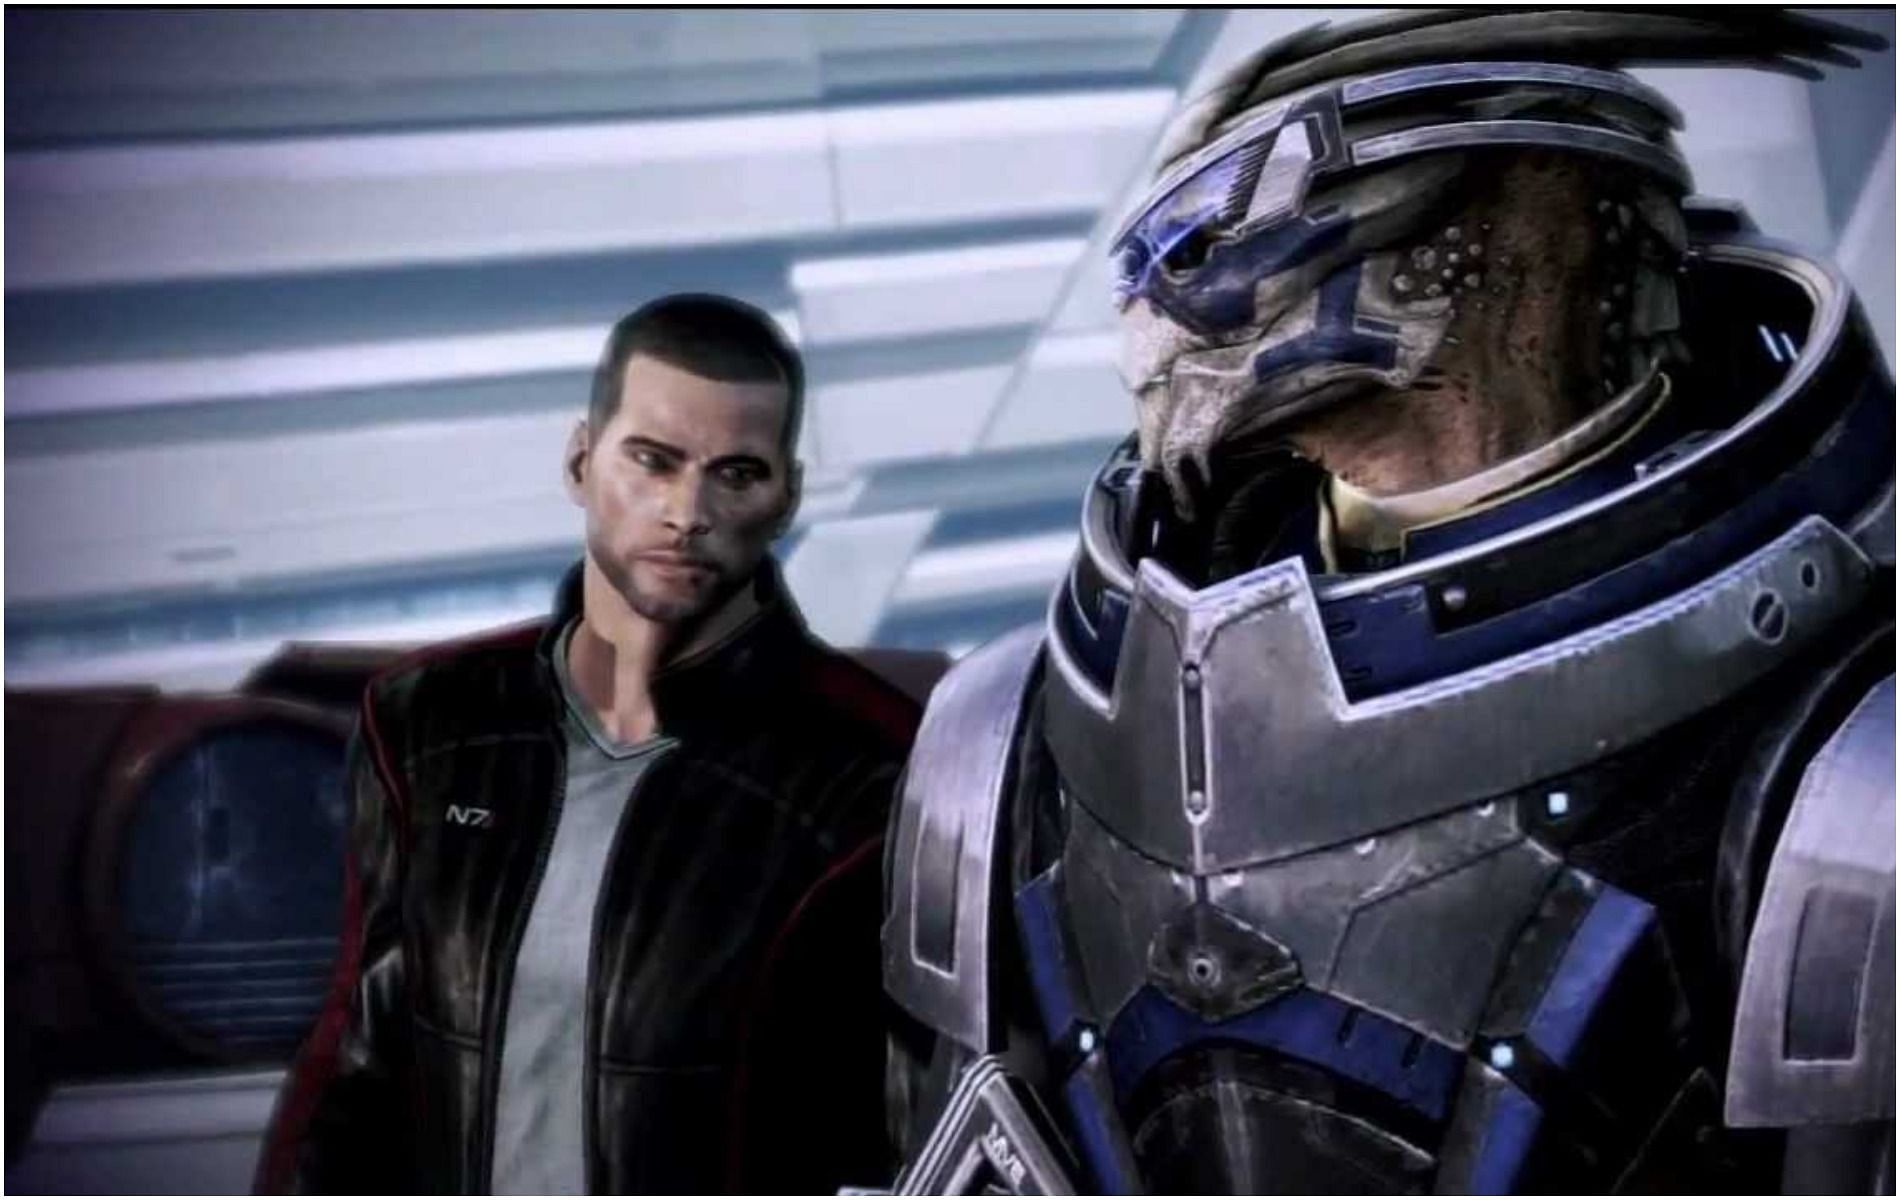 Garrus and Sheppard get ready for some target practice (image via BioWare)